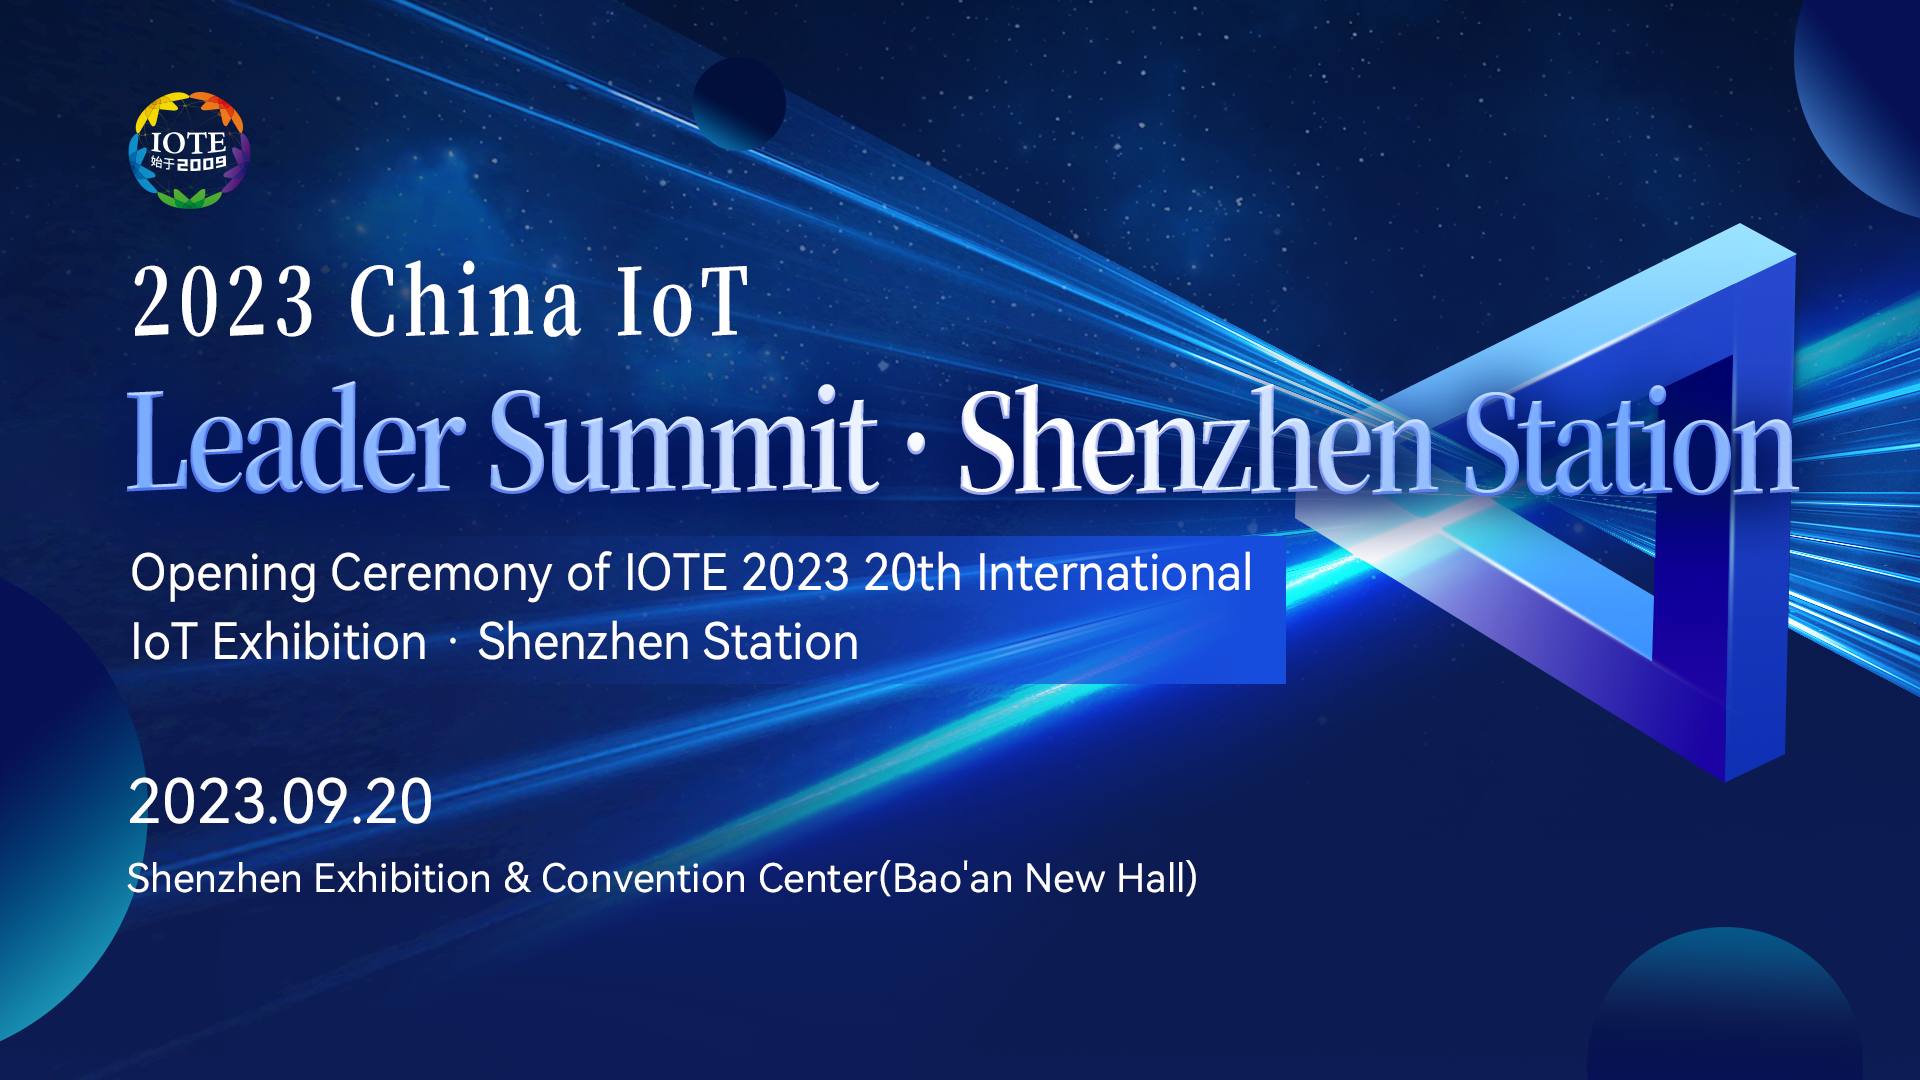 2023 China IoT Industry Leader Summit · Shenzhen Station — Opening Ceremony of IOTE 2023 20th International IoT Exhibition